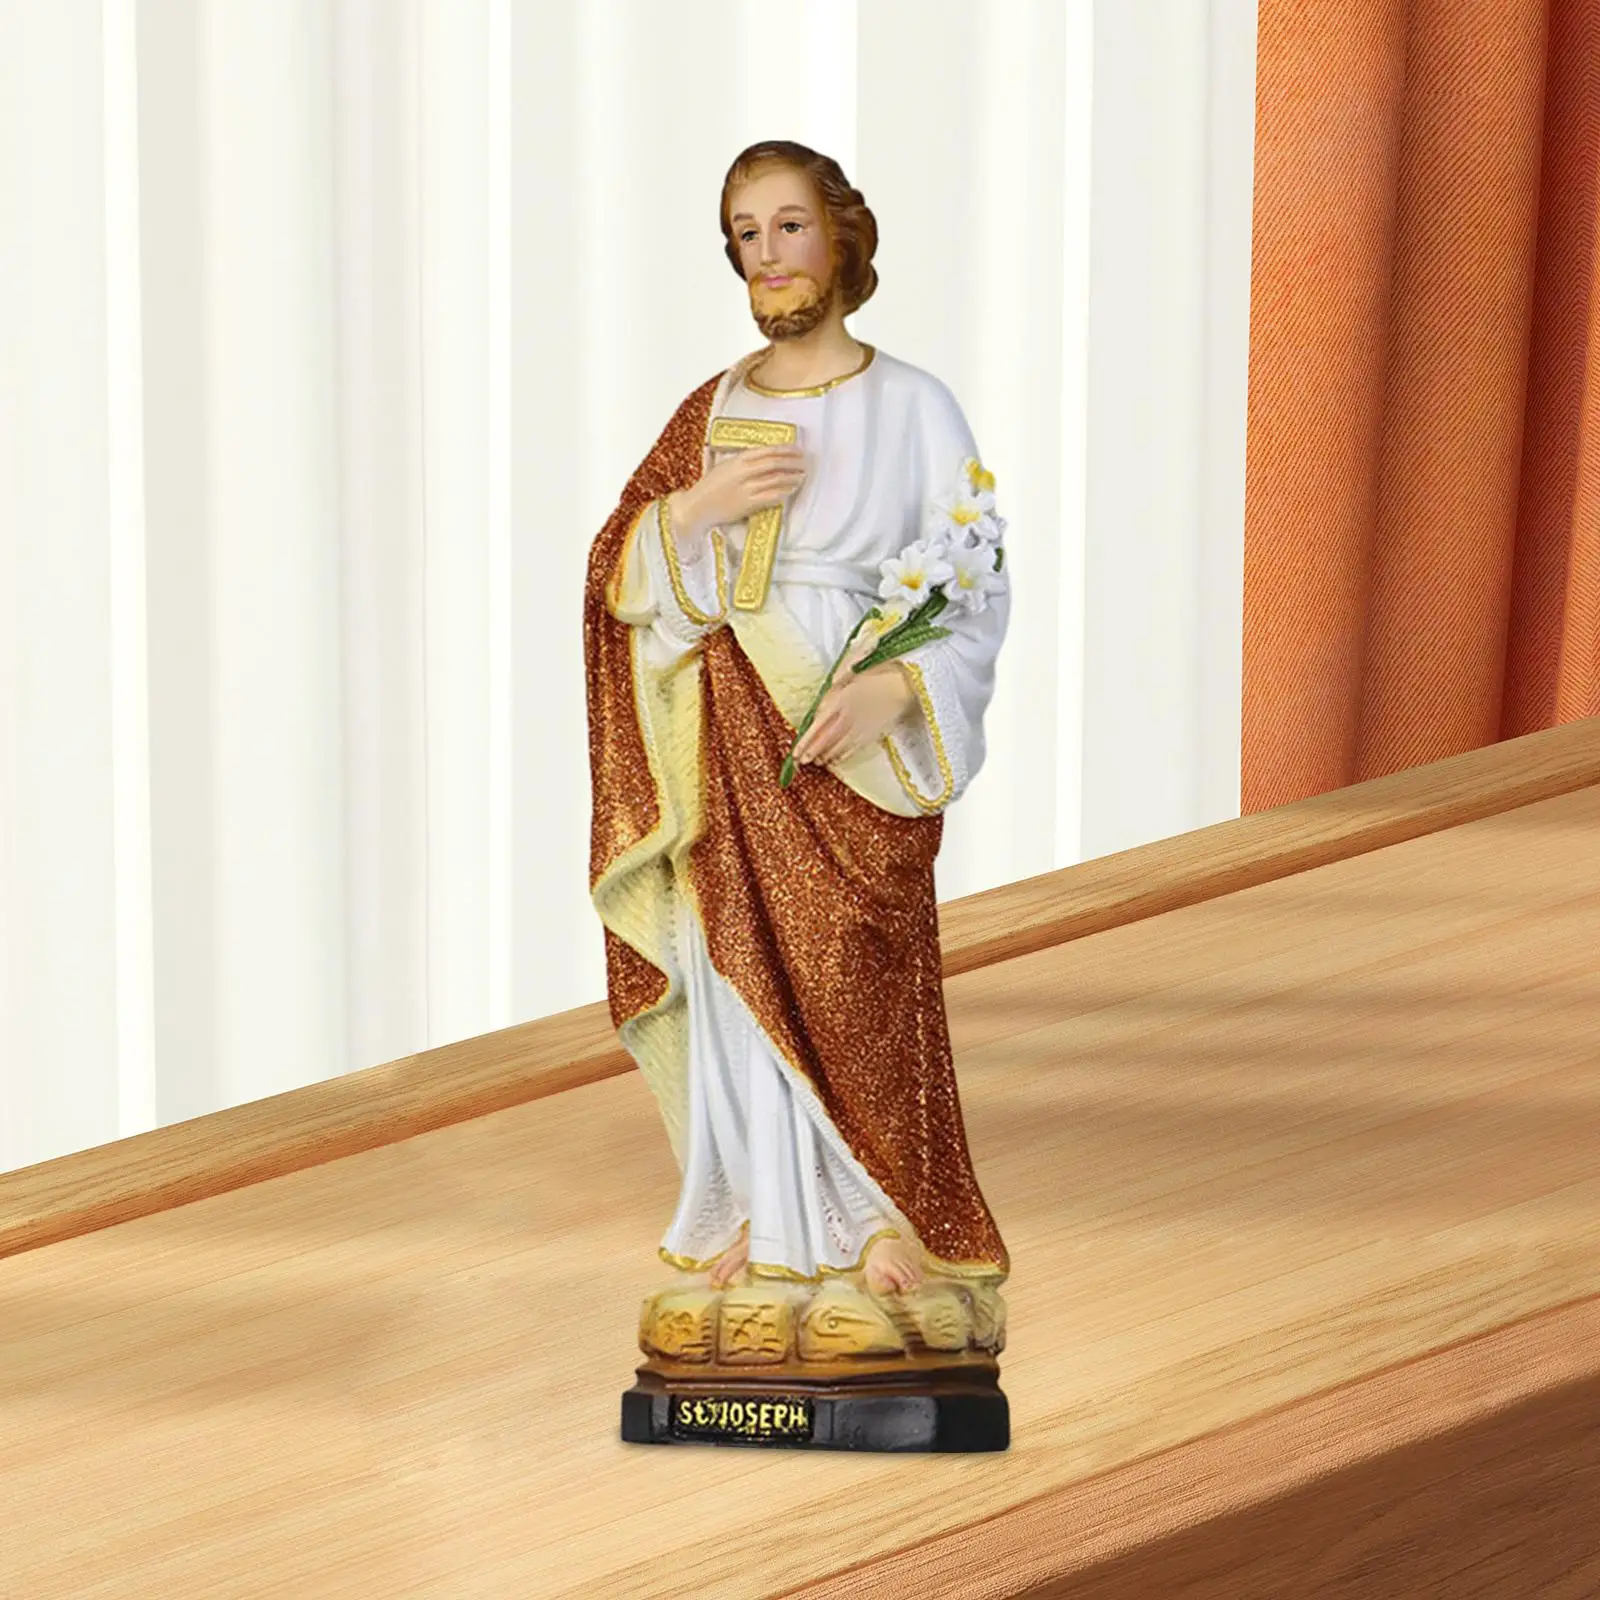 Saint Joseph Figures Collections Crafts Tabletop Display Religious Gifts for Church Shelf Cabinet Fireplace New Year Present